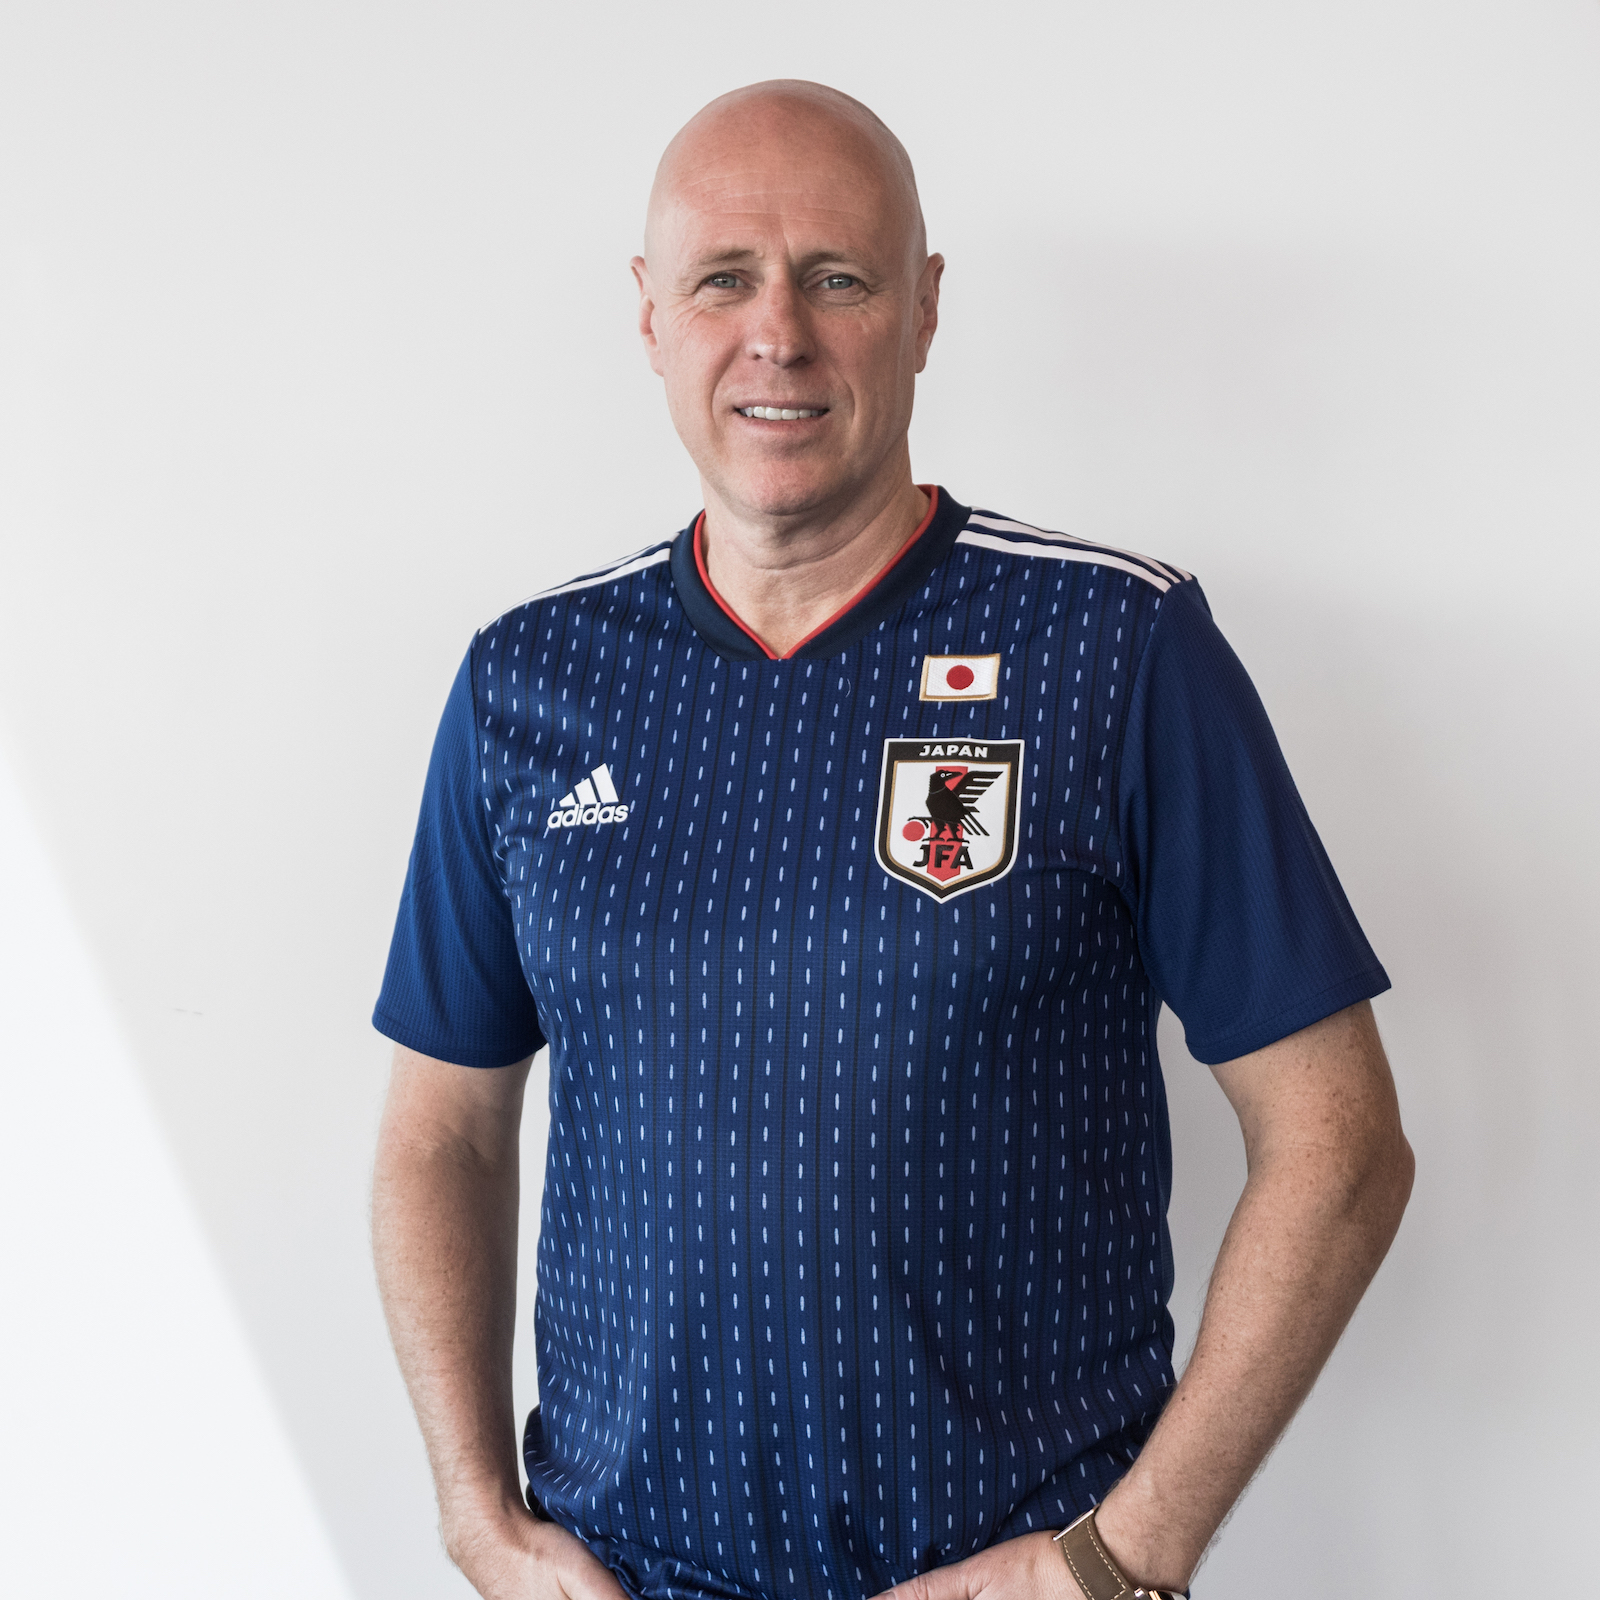 The right fit: adidas Japan - Japan Today